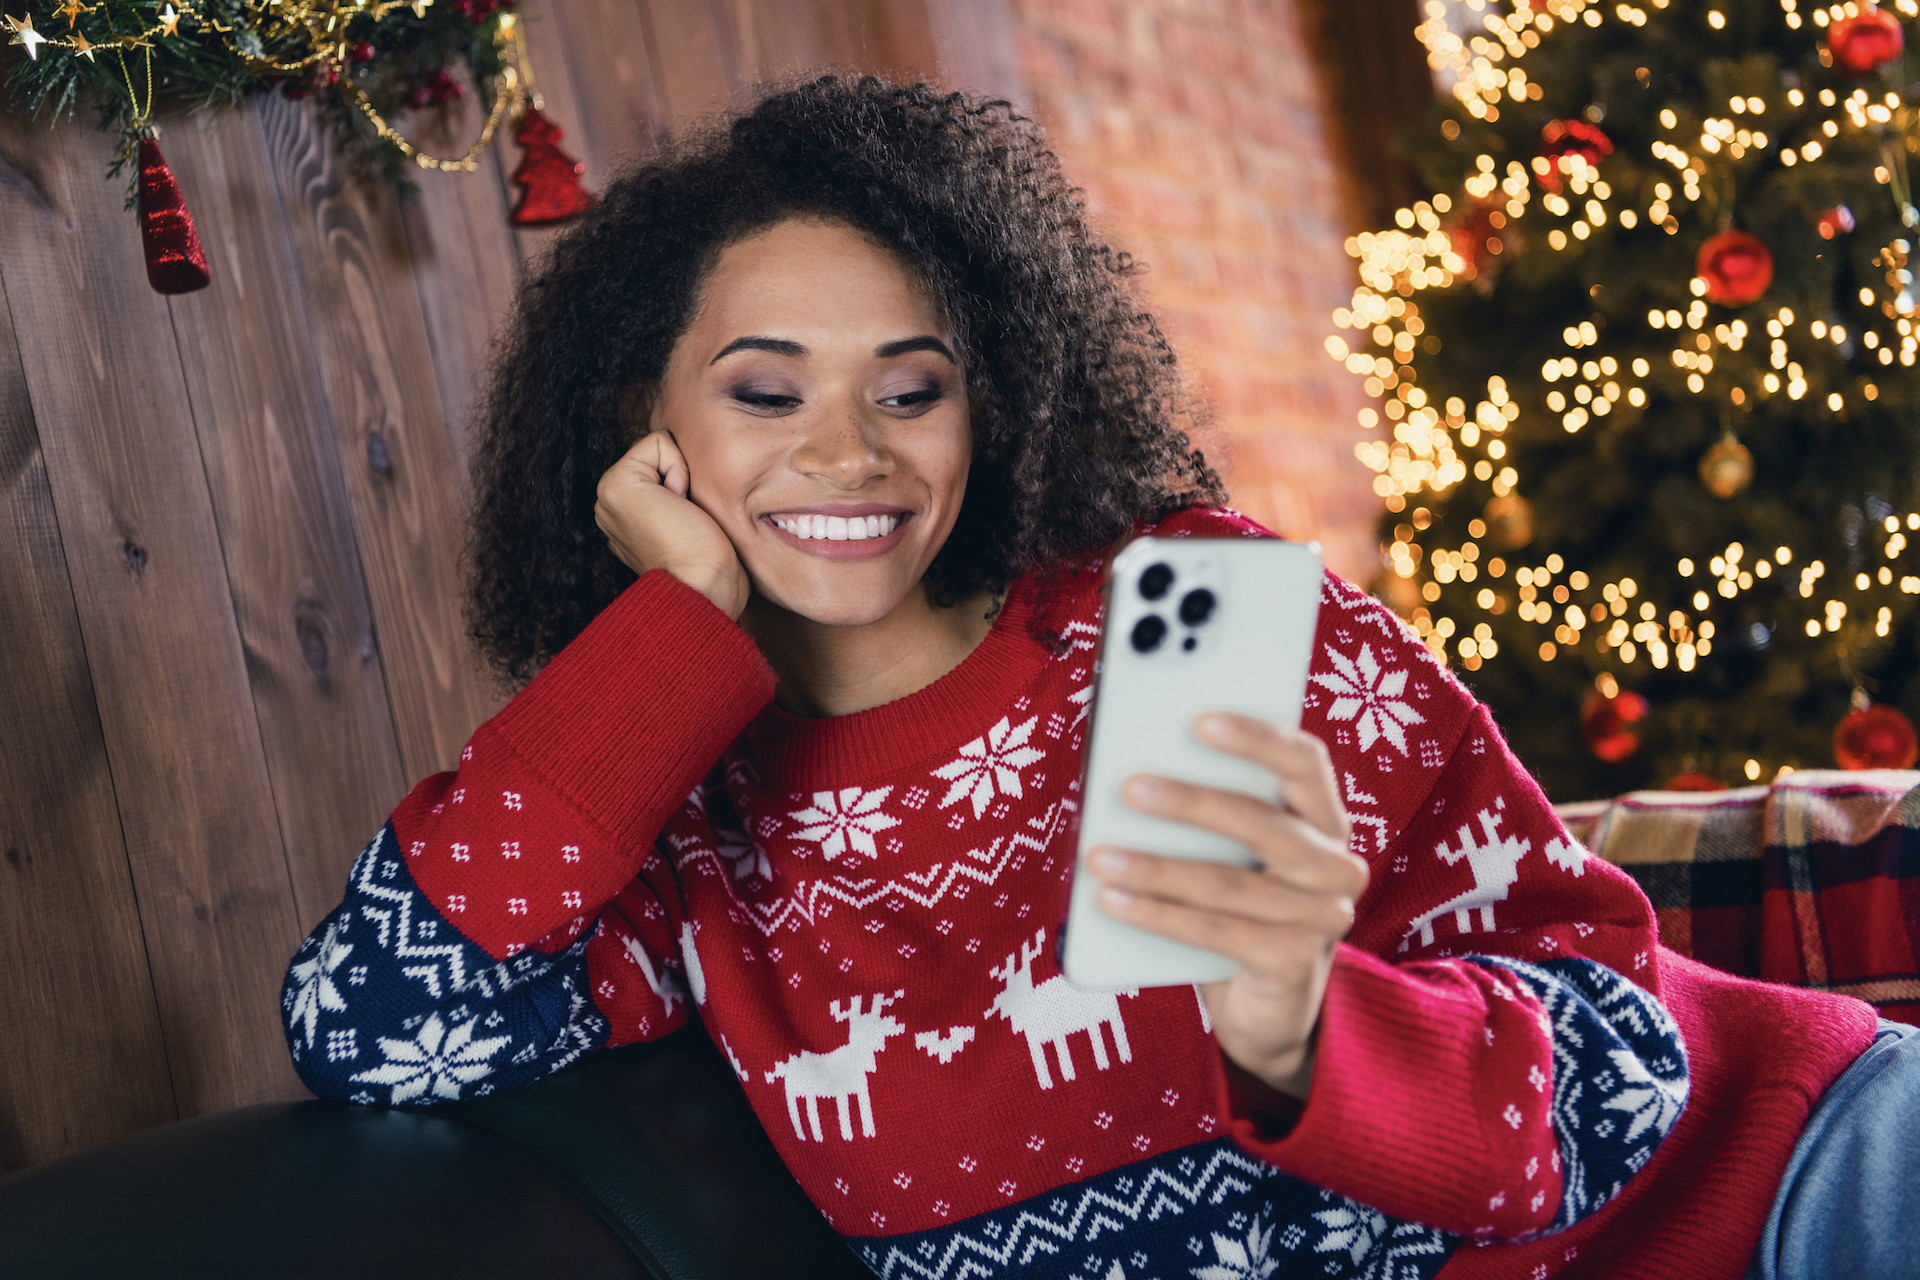 A photo of a woman in a Christmas sweater checking her smartphone